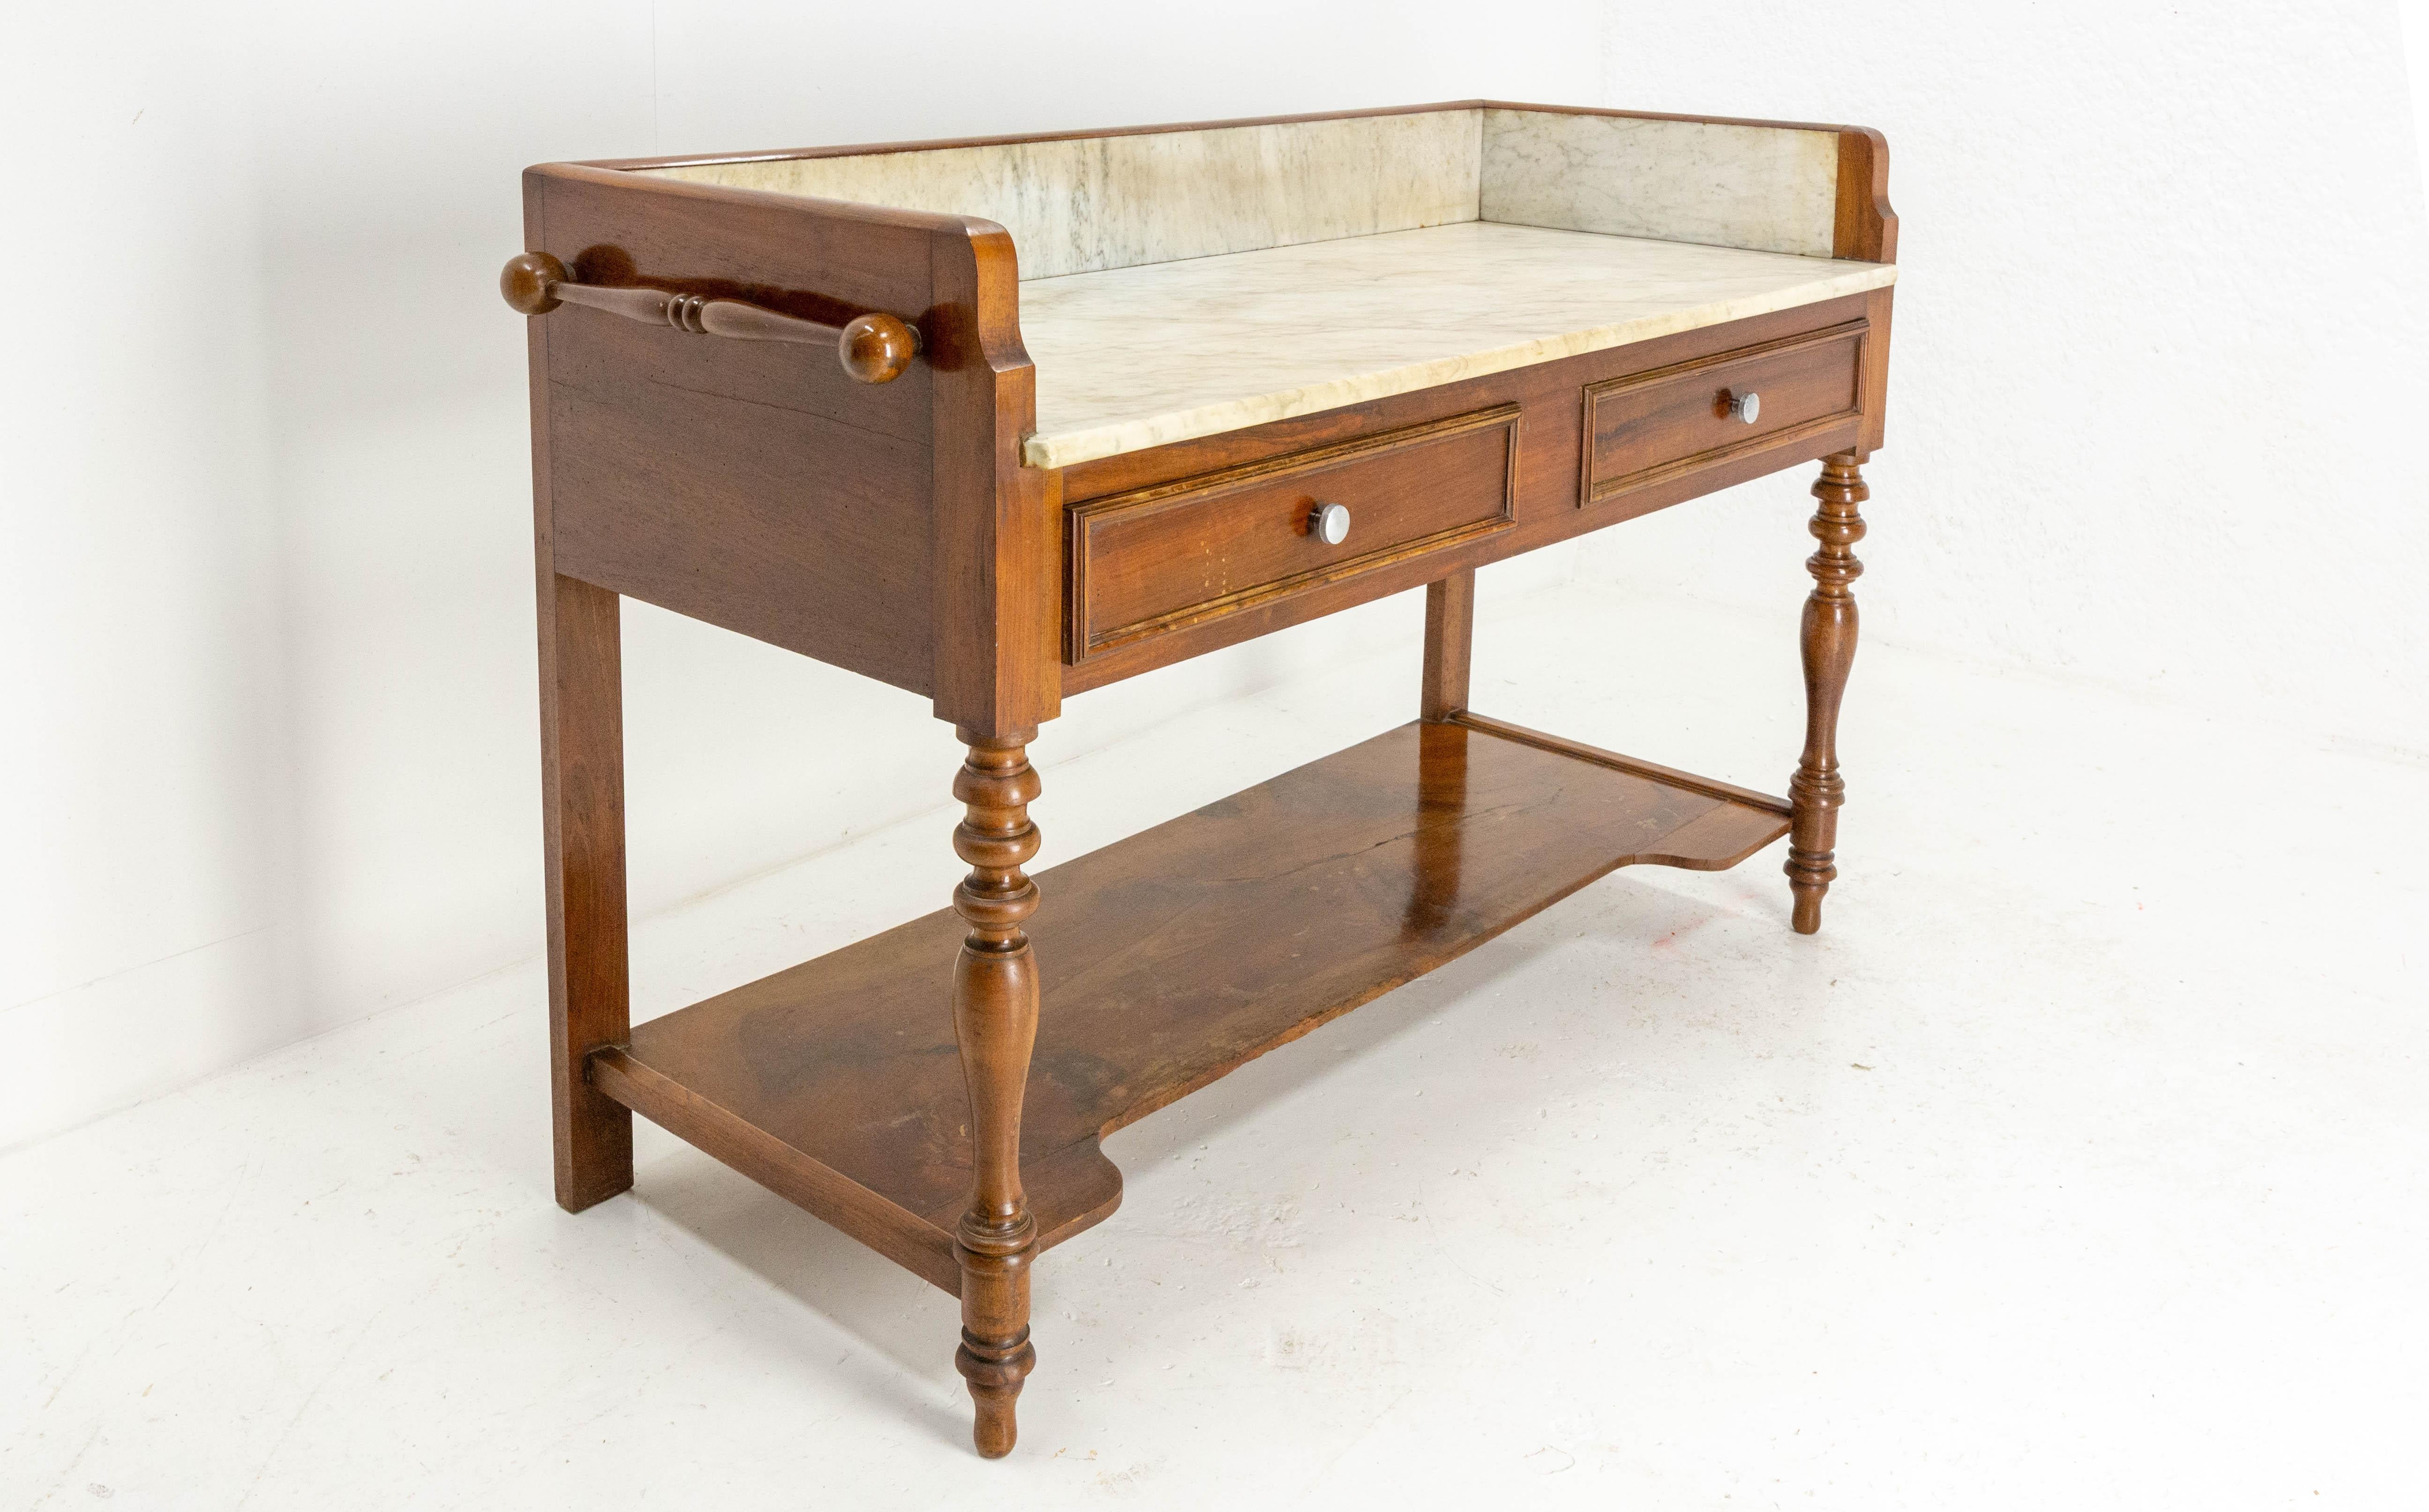 Vanity dressing table
Marble and walnut wood
France circa 1900
Dimension below the table W 47.24 in. (120 cm) D 20.08 in. (51 cm)
Ideal for a double vanity
Good condition, marks in the marble (see photos)
The last four photos are the most accurate